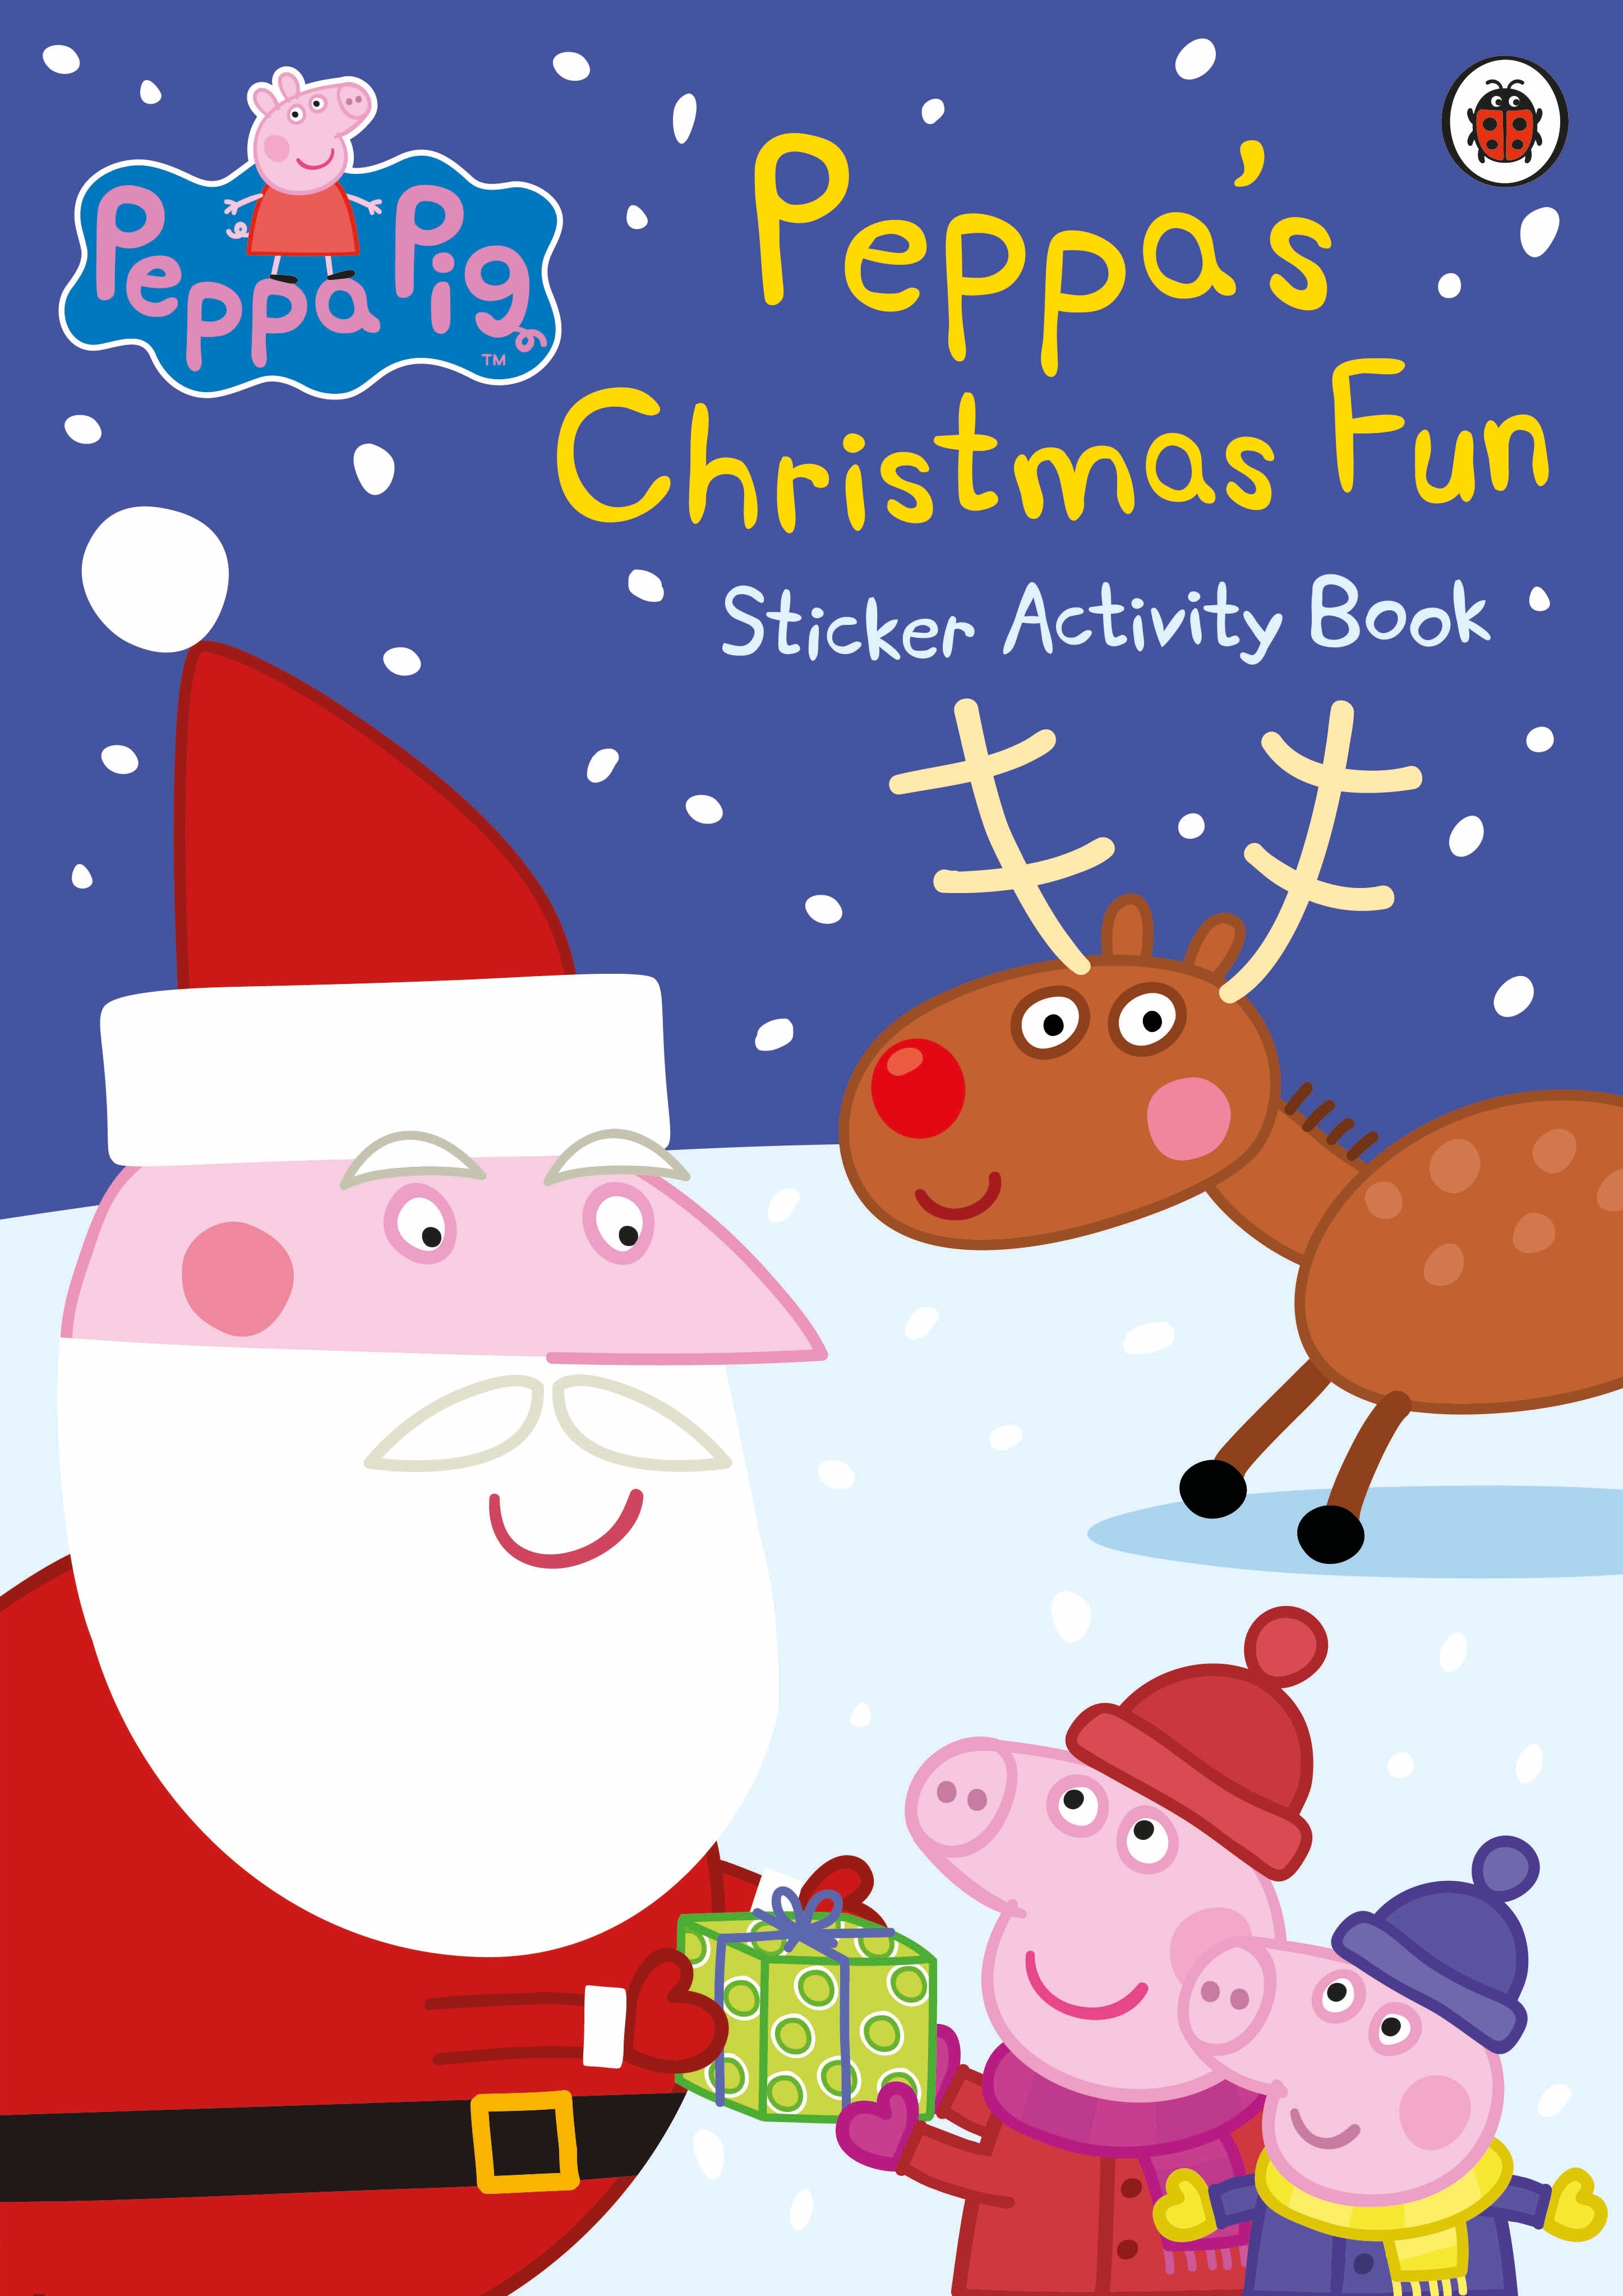 Book “Peppa Pig: Peppa's Christmas Fun Sticker Activity Book” by Peppa Pig — October 1, 2015